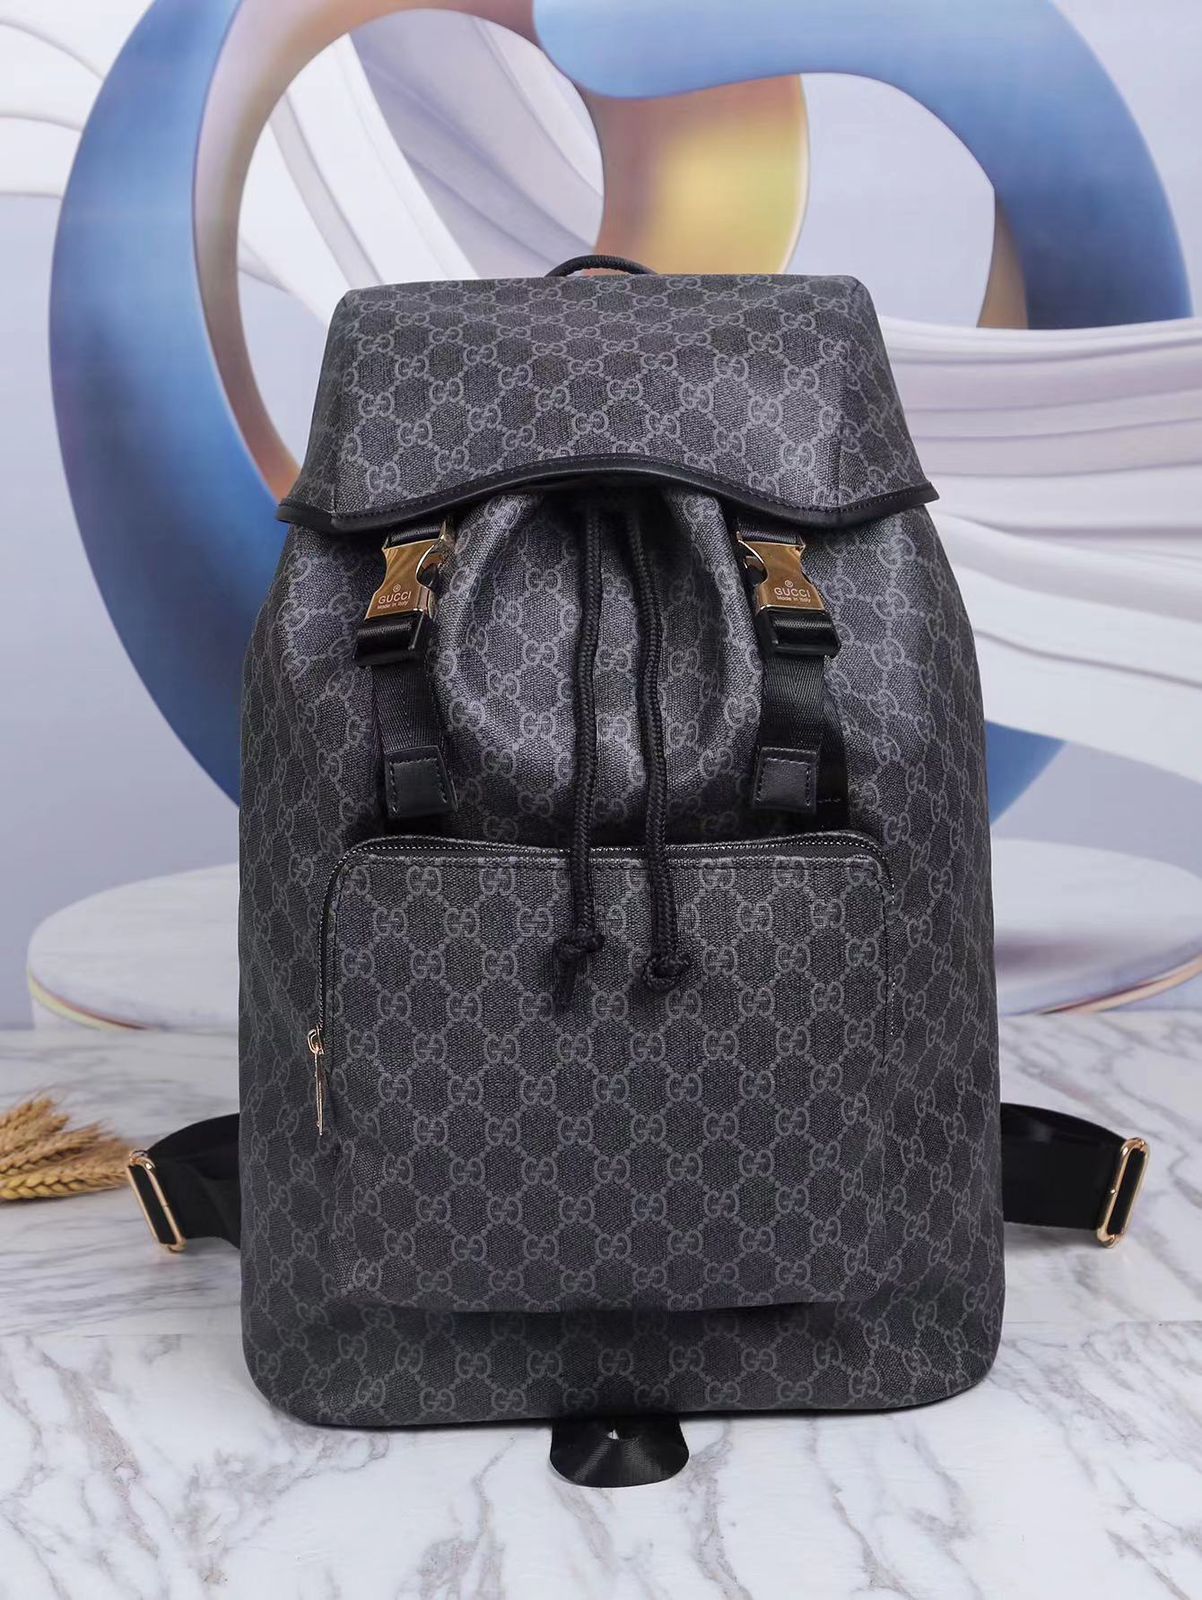 The Sophisticated Commuter Backpack